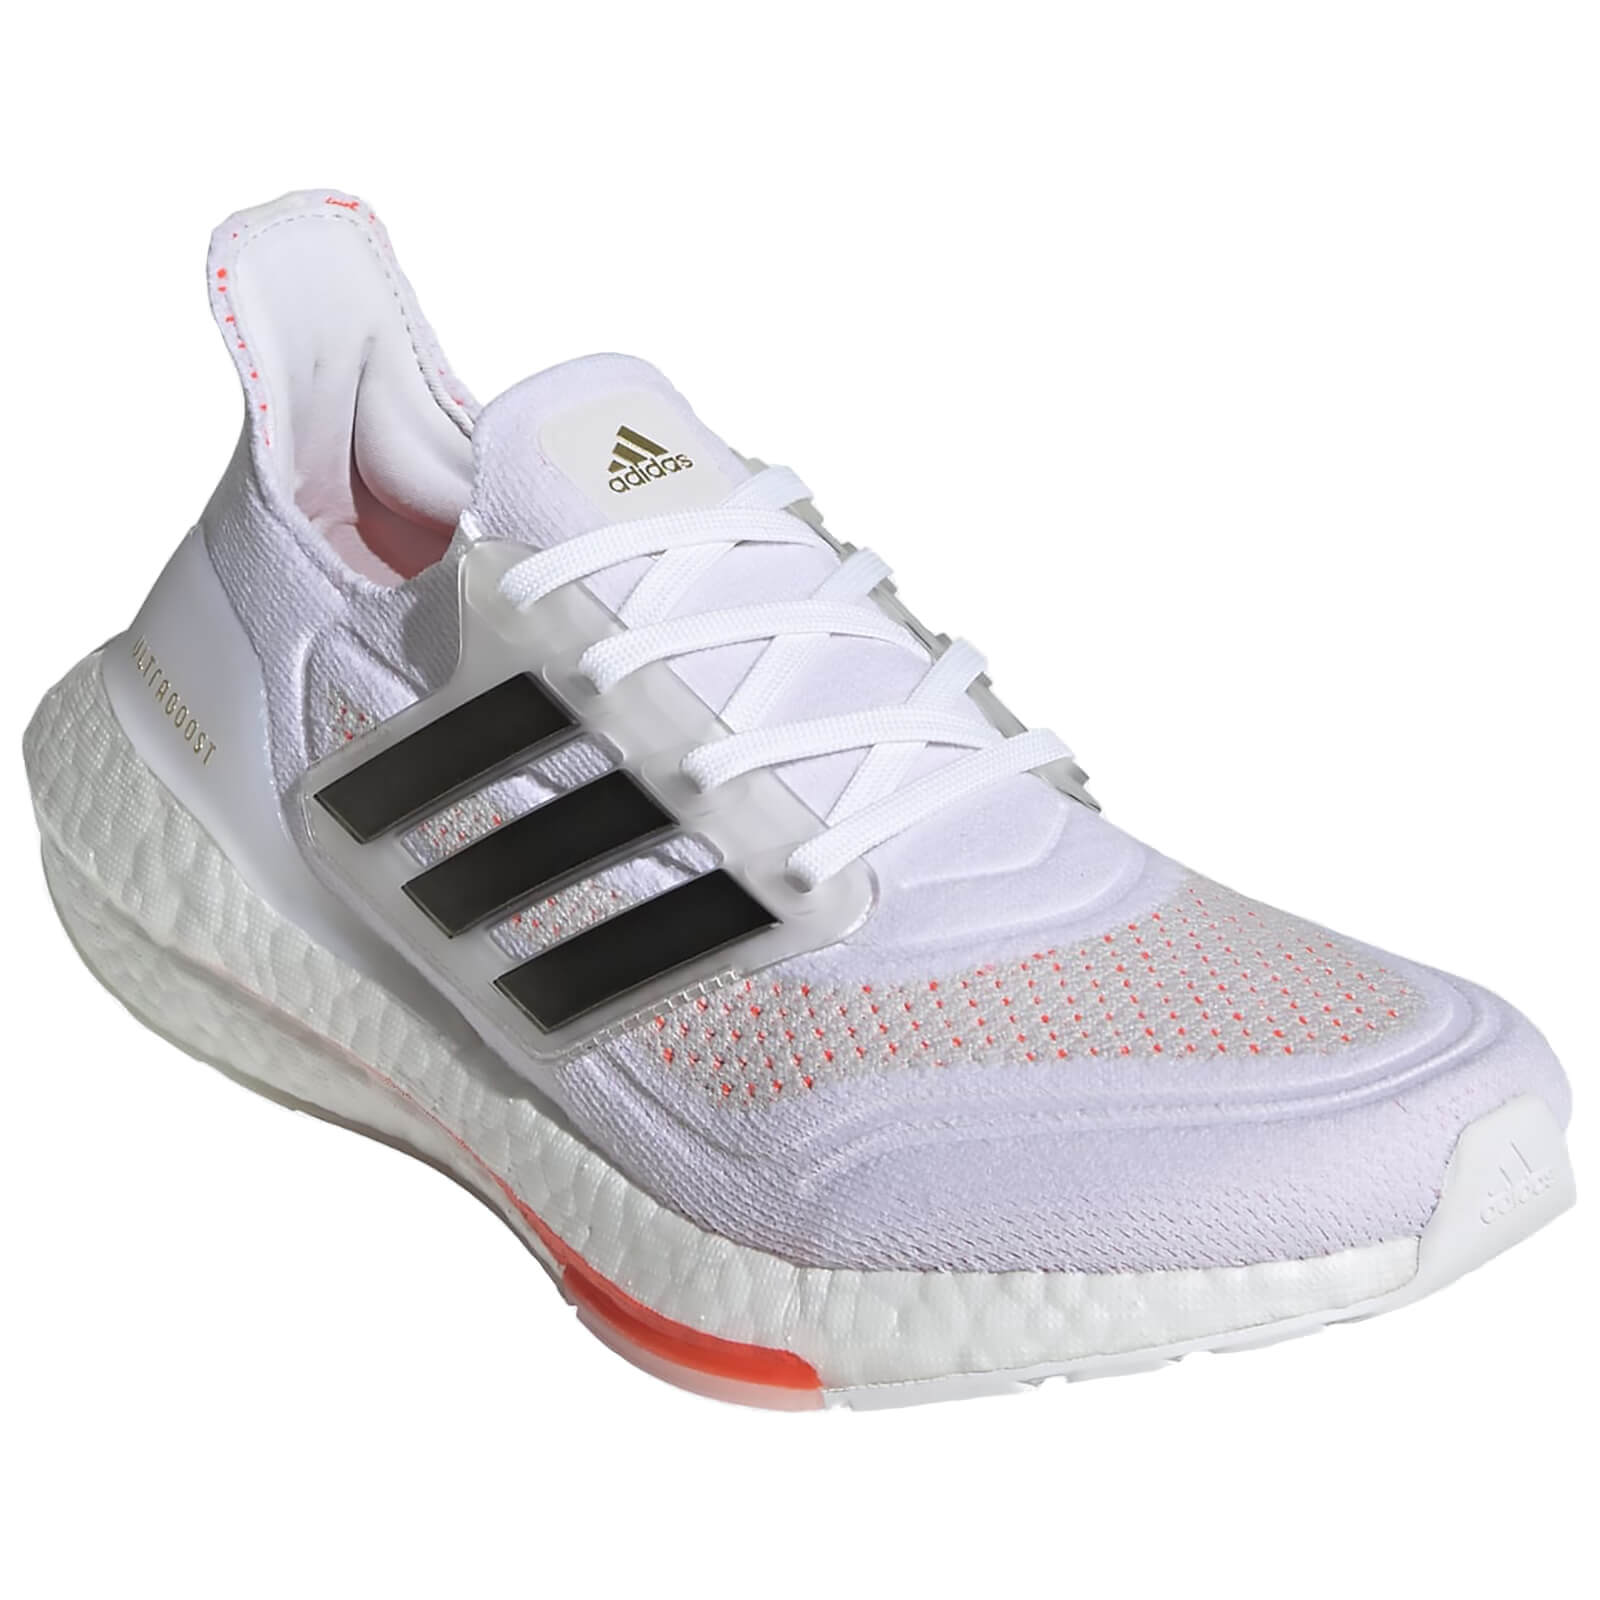 adidas Women's Ultra Boost 21 Running Shoes - Ftwr White/Core Black/Solar Red - US 6.5/UK 5